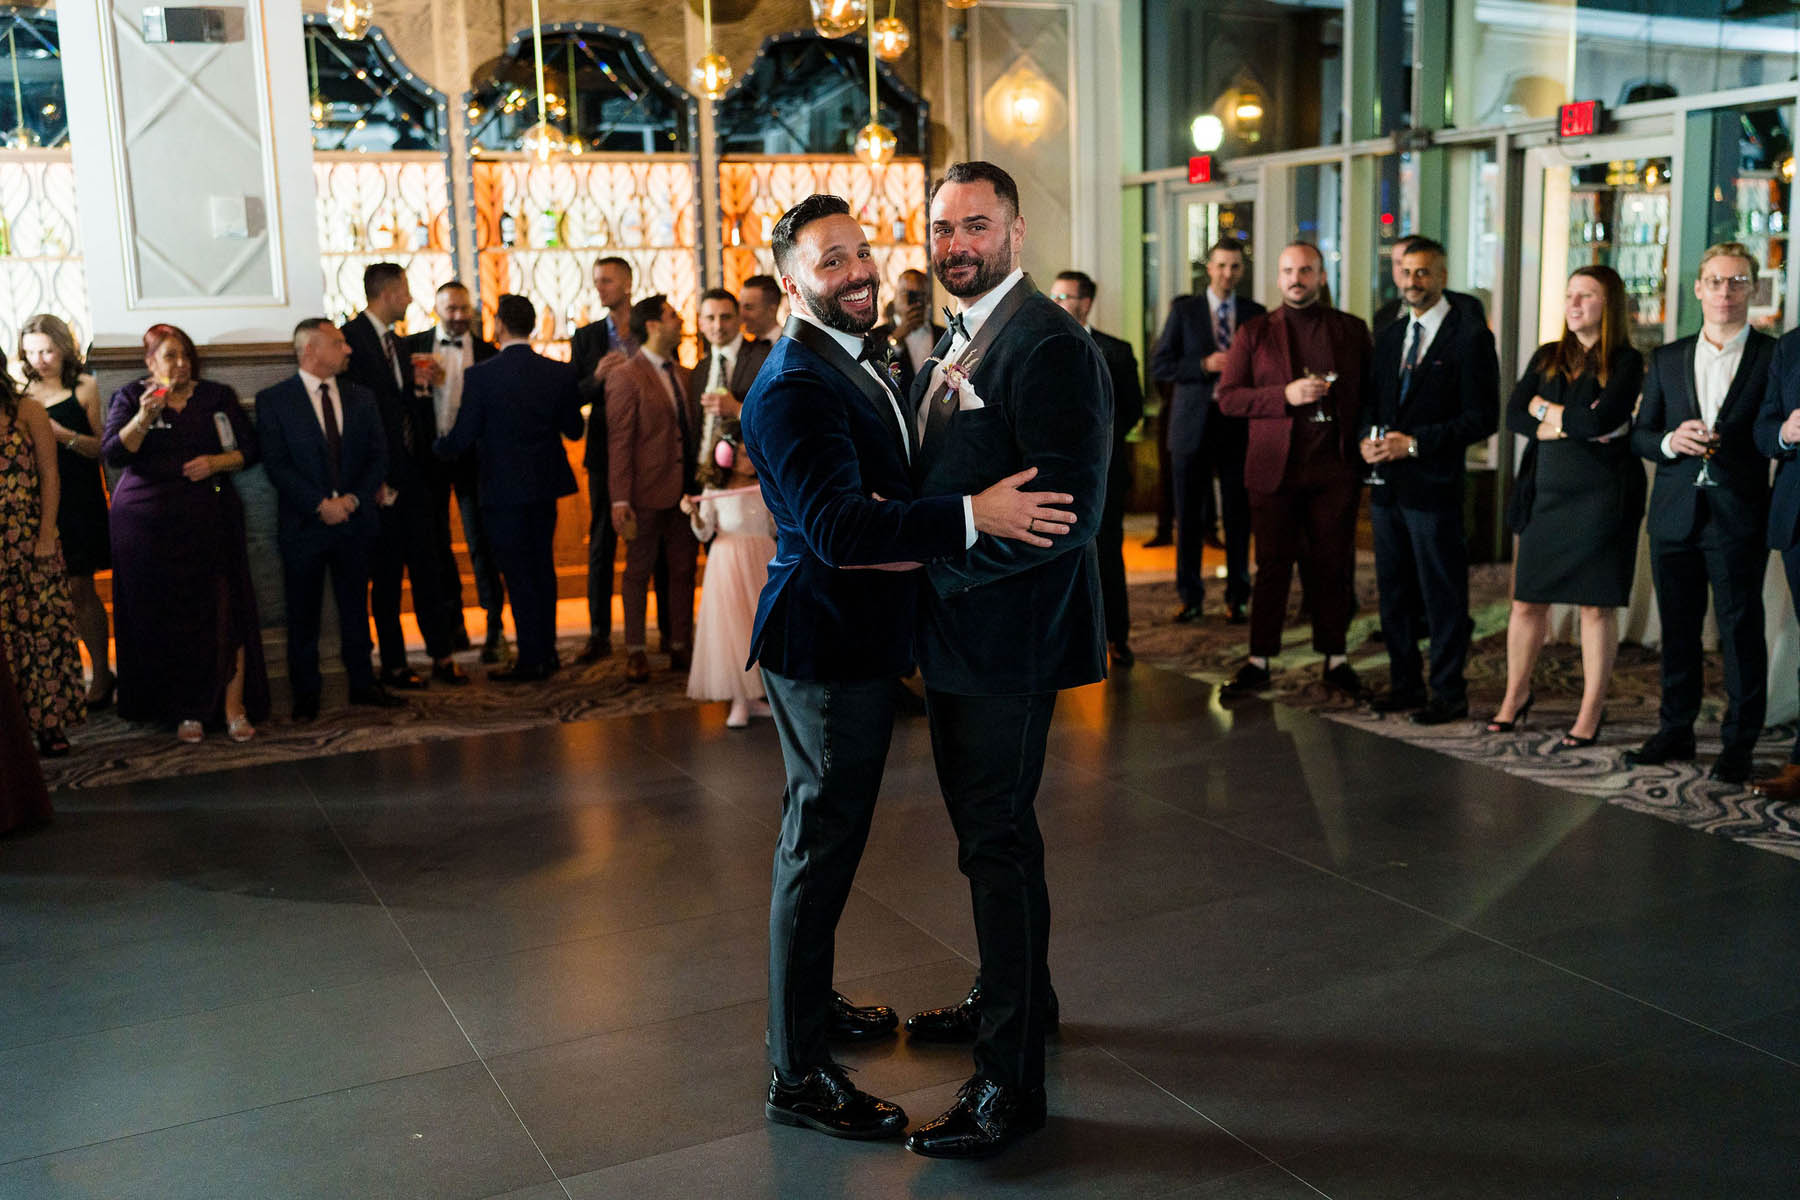 The grooms stand in the middle of the dance floor and smile at the camera.